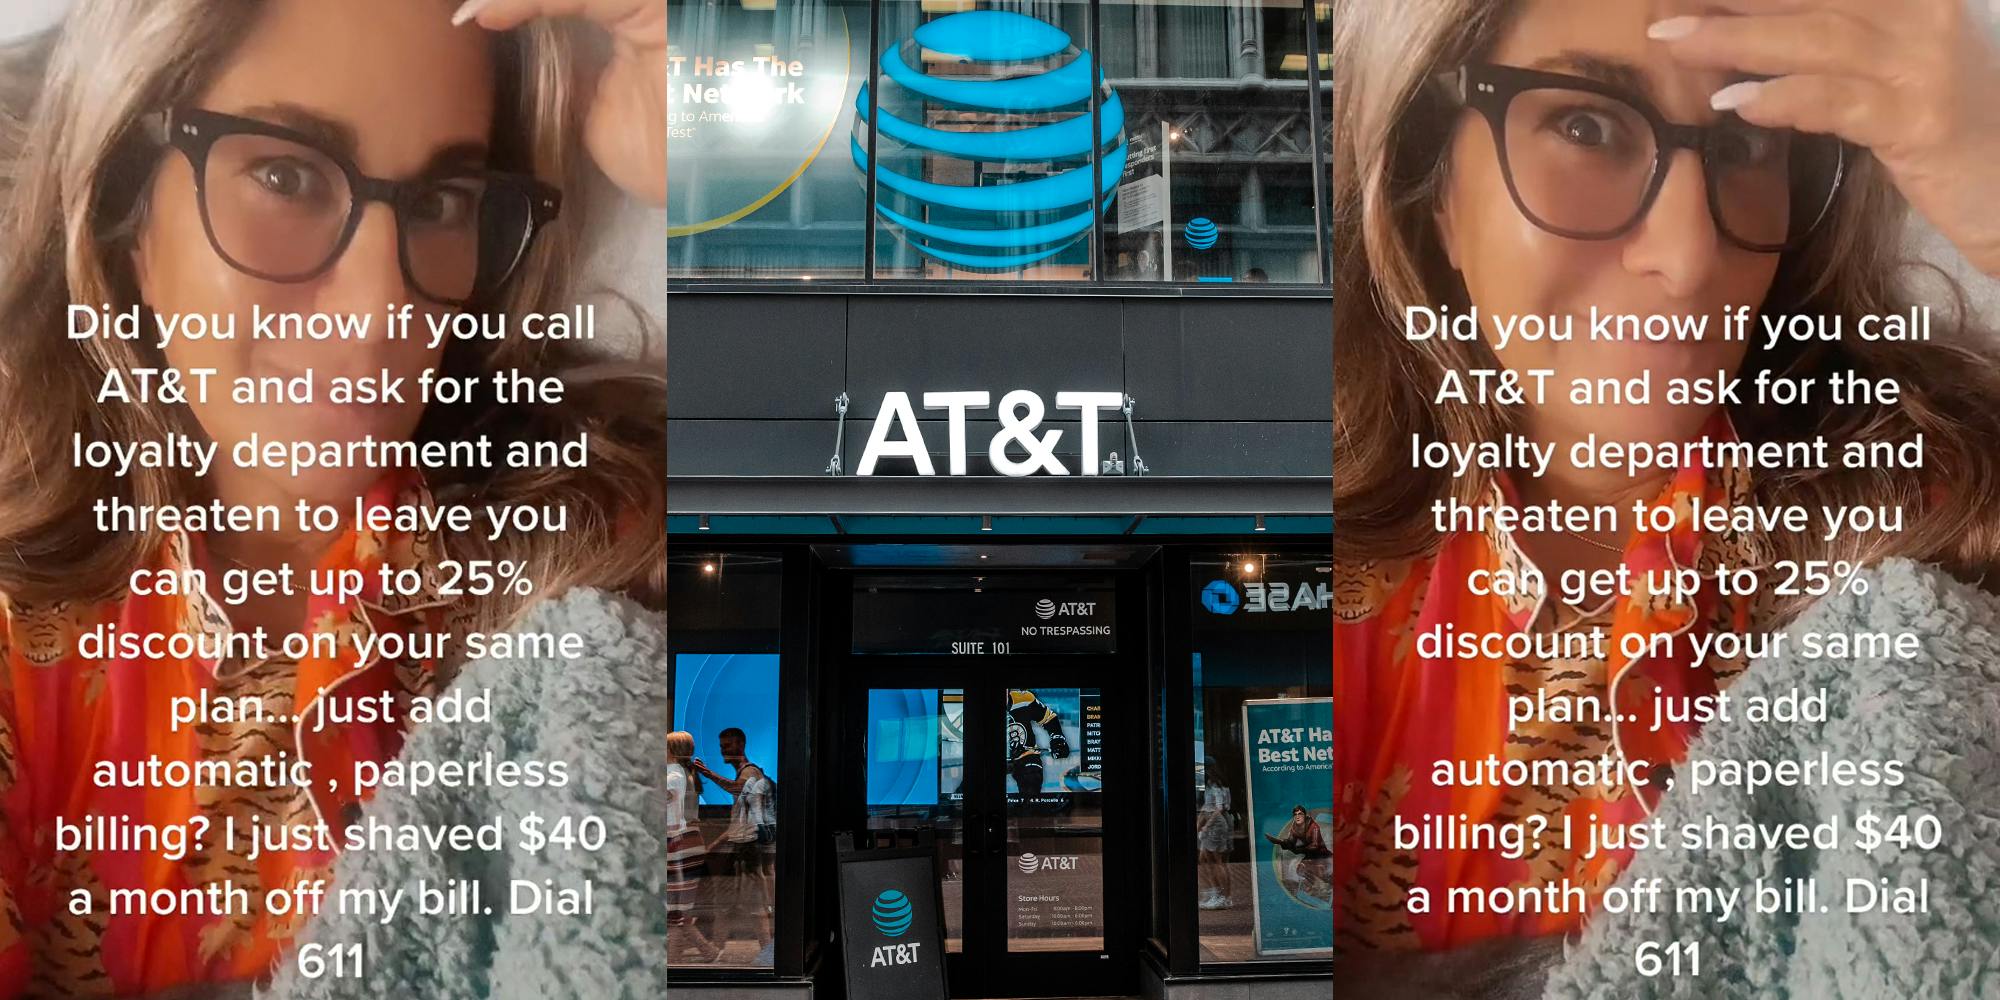 woman with caption "Did you know if you call AT&T and ask for the loyalty department and threaten to leave you can get up to 25% discount on your same plan... just add automatic, paperless billing? I just saved $40 a month off my bill. Dial 611" (l) AT&T sign on building (c) woman with caption "Did you know if you call AT&T and ask for the loyalty department and threaten to leave you can get up to 25% discount on your same plan... just add automatic, paperless billing? I just saved $40 a month off my bill. Dial 611" (r)